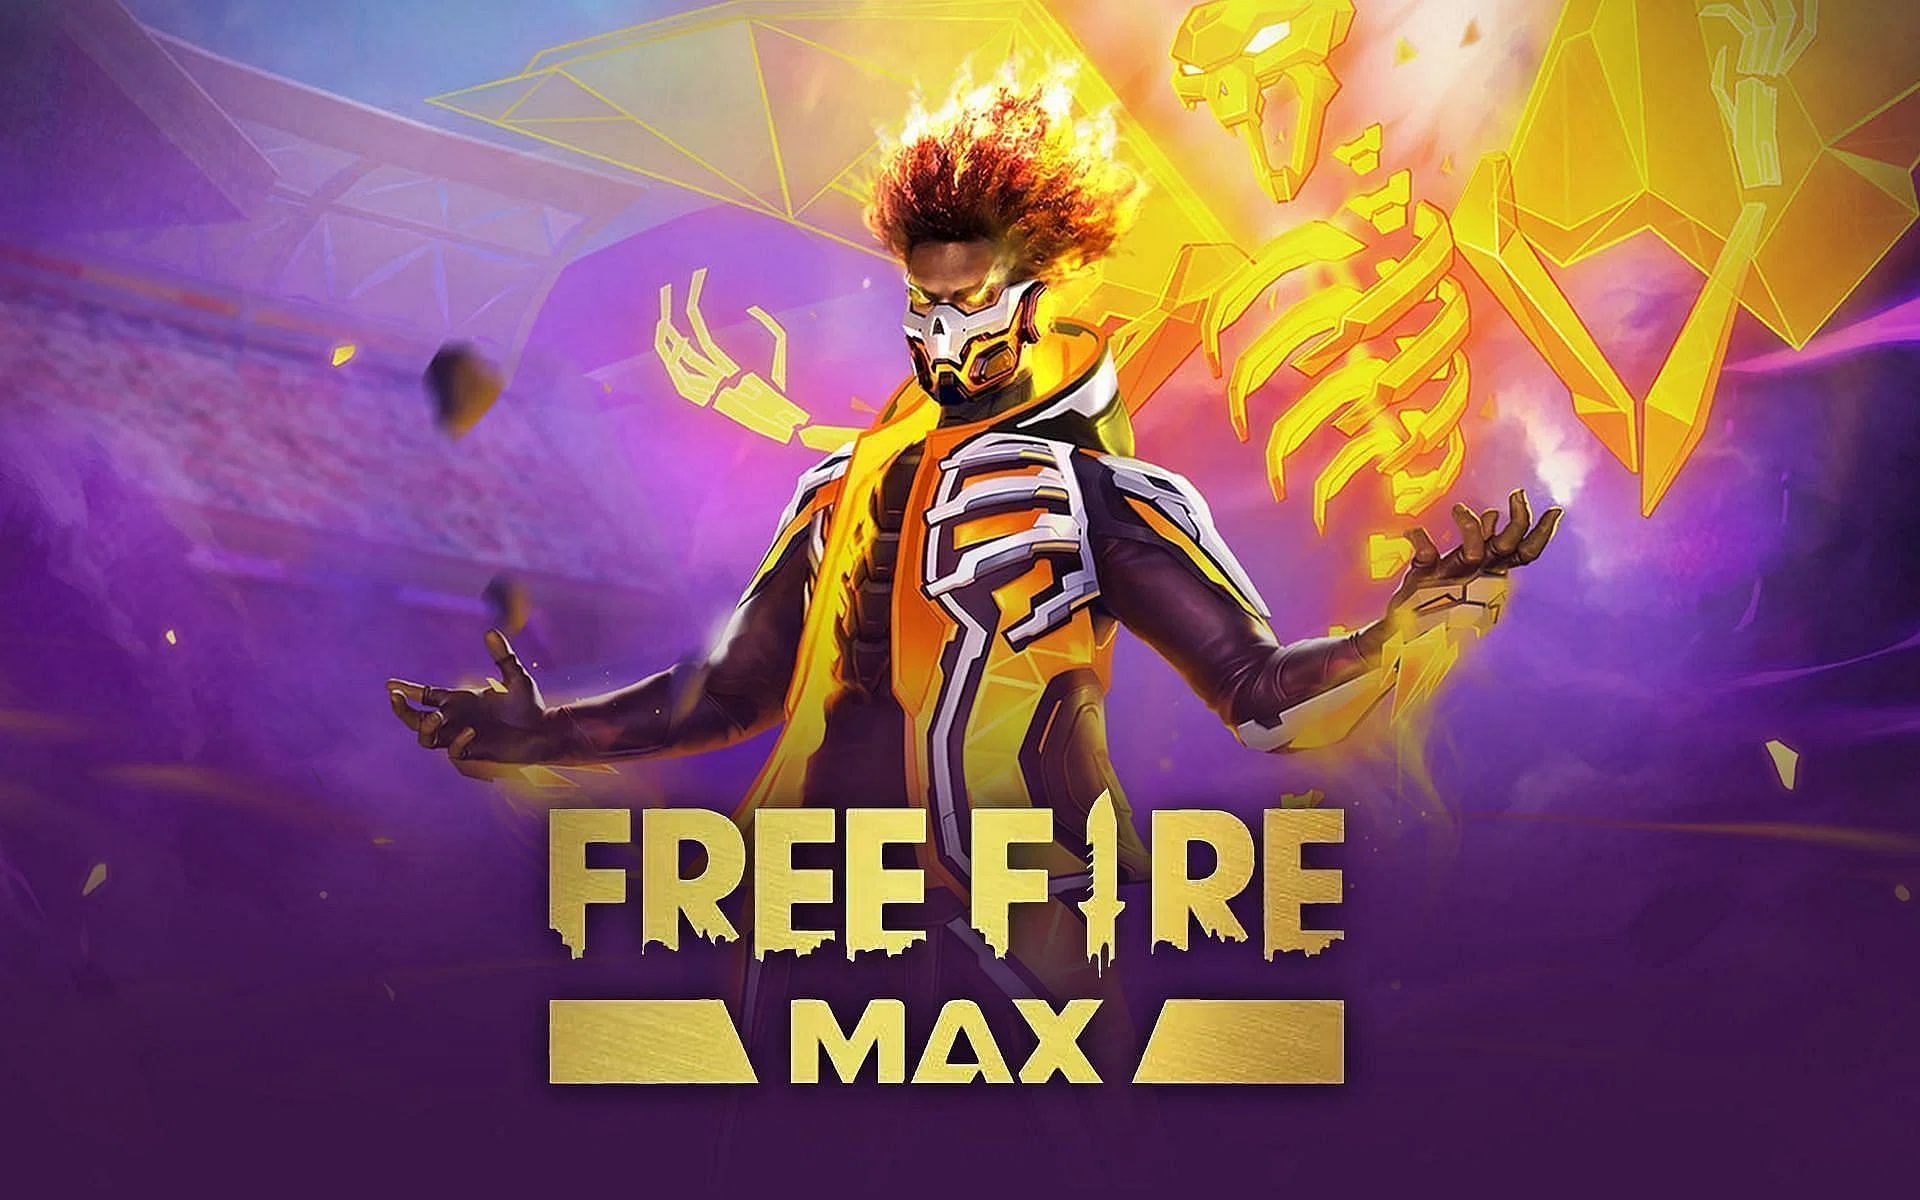 Garena Free Fire Max Redeem Codes for August 14 2022, Grab these free FF Max diamonds, skins and more